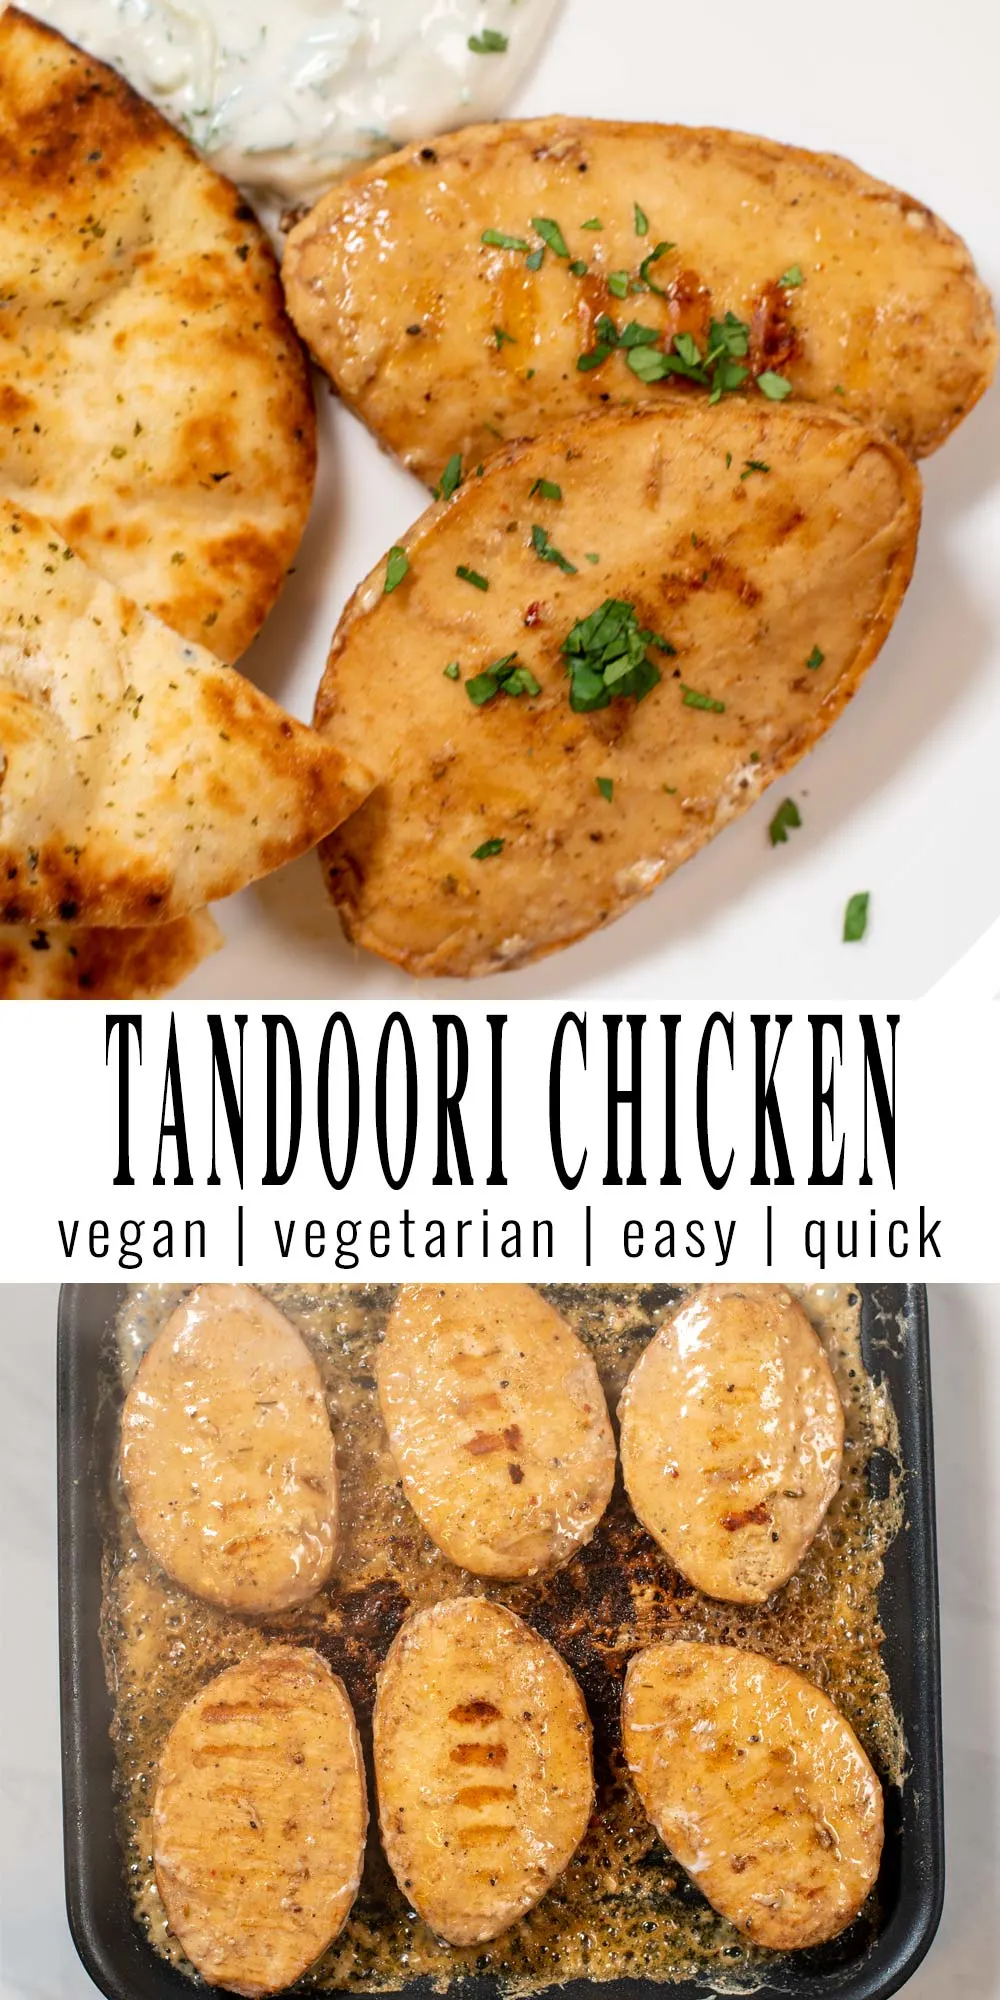 Collage of two pictures of Tandoori Chicken with recipe title text.